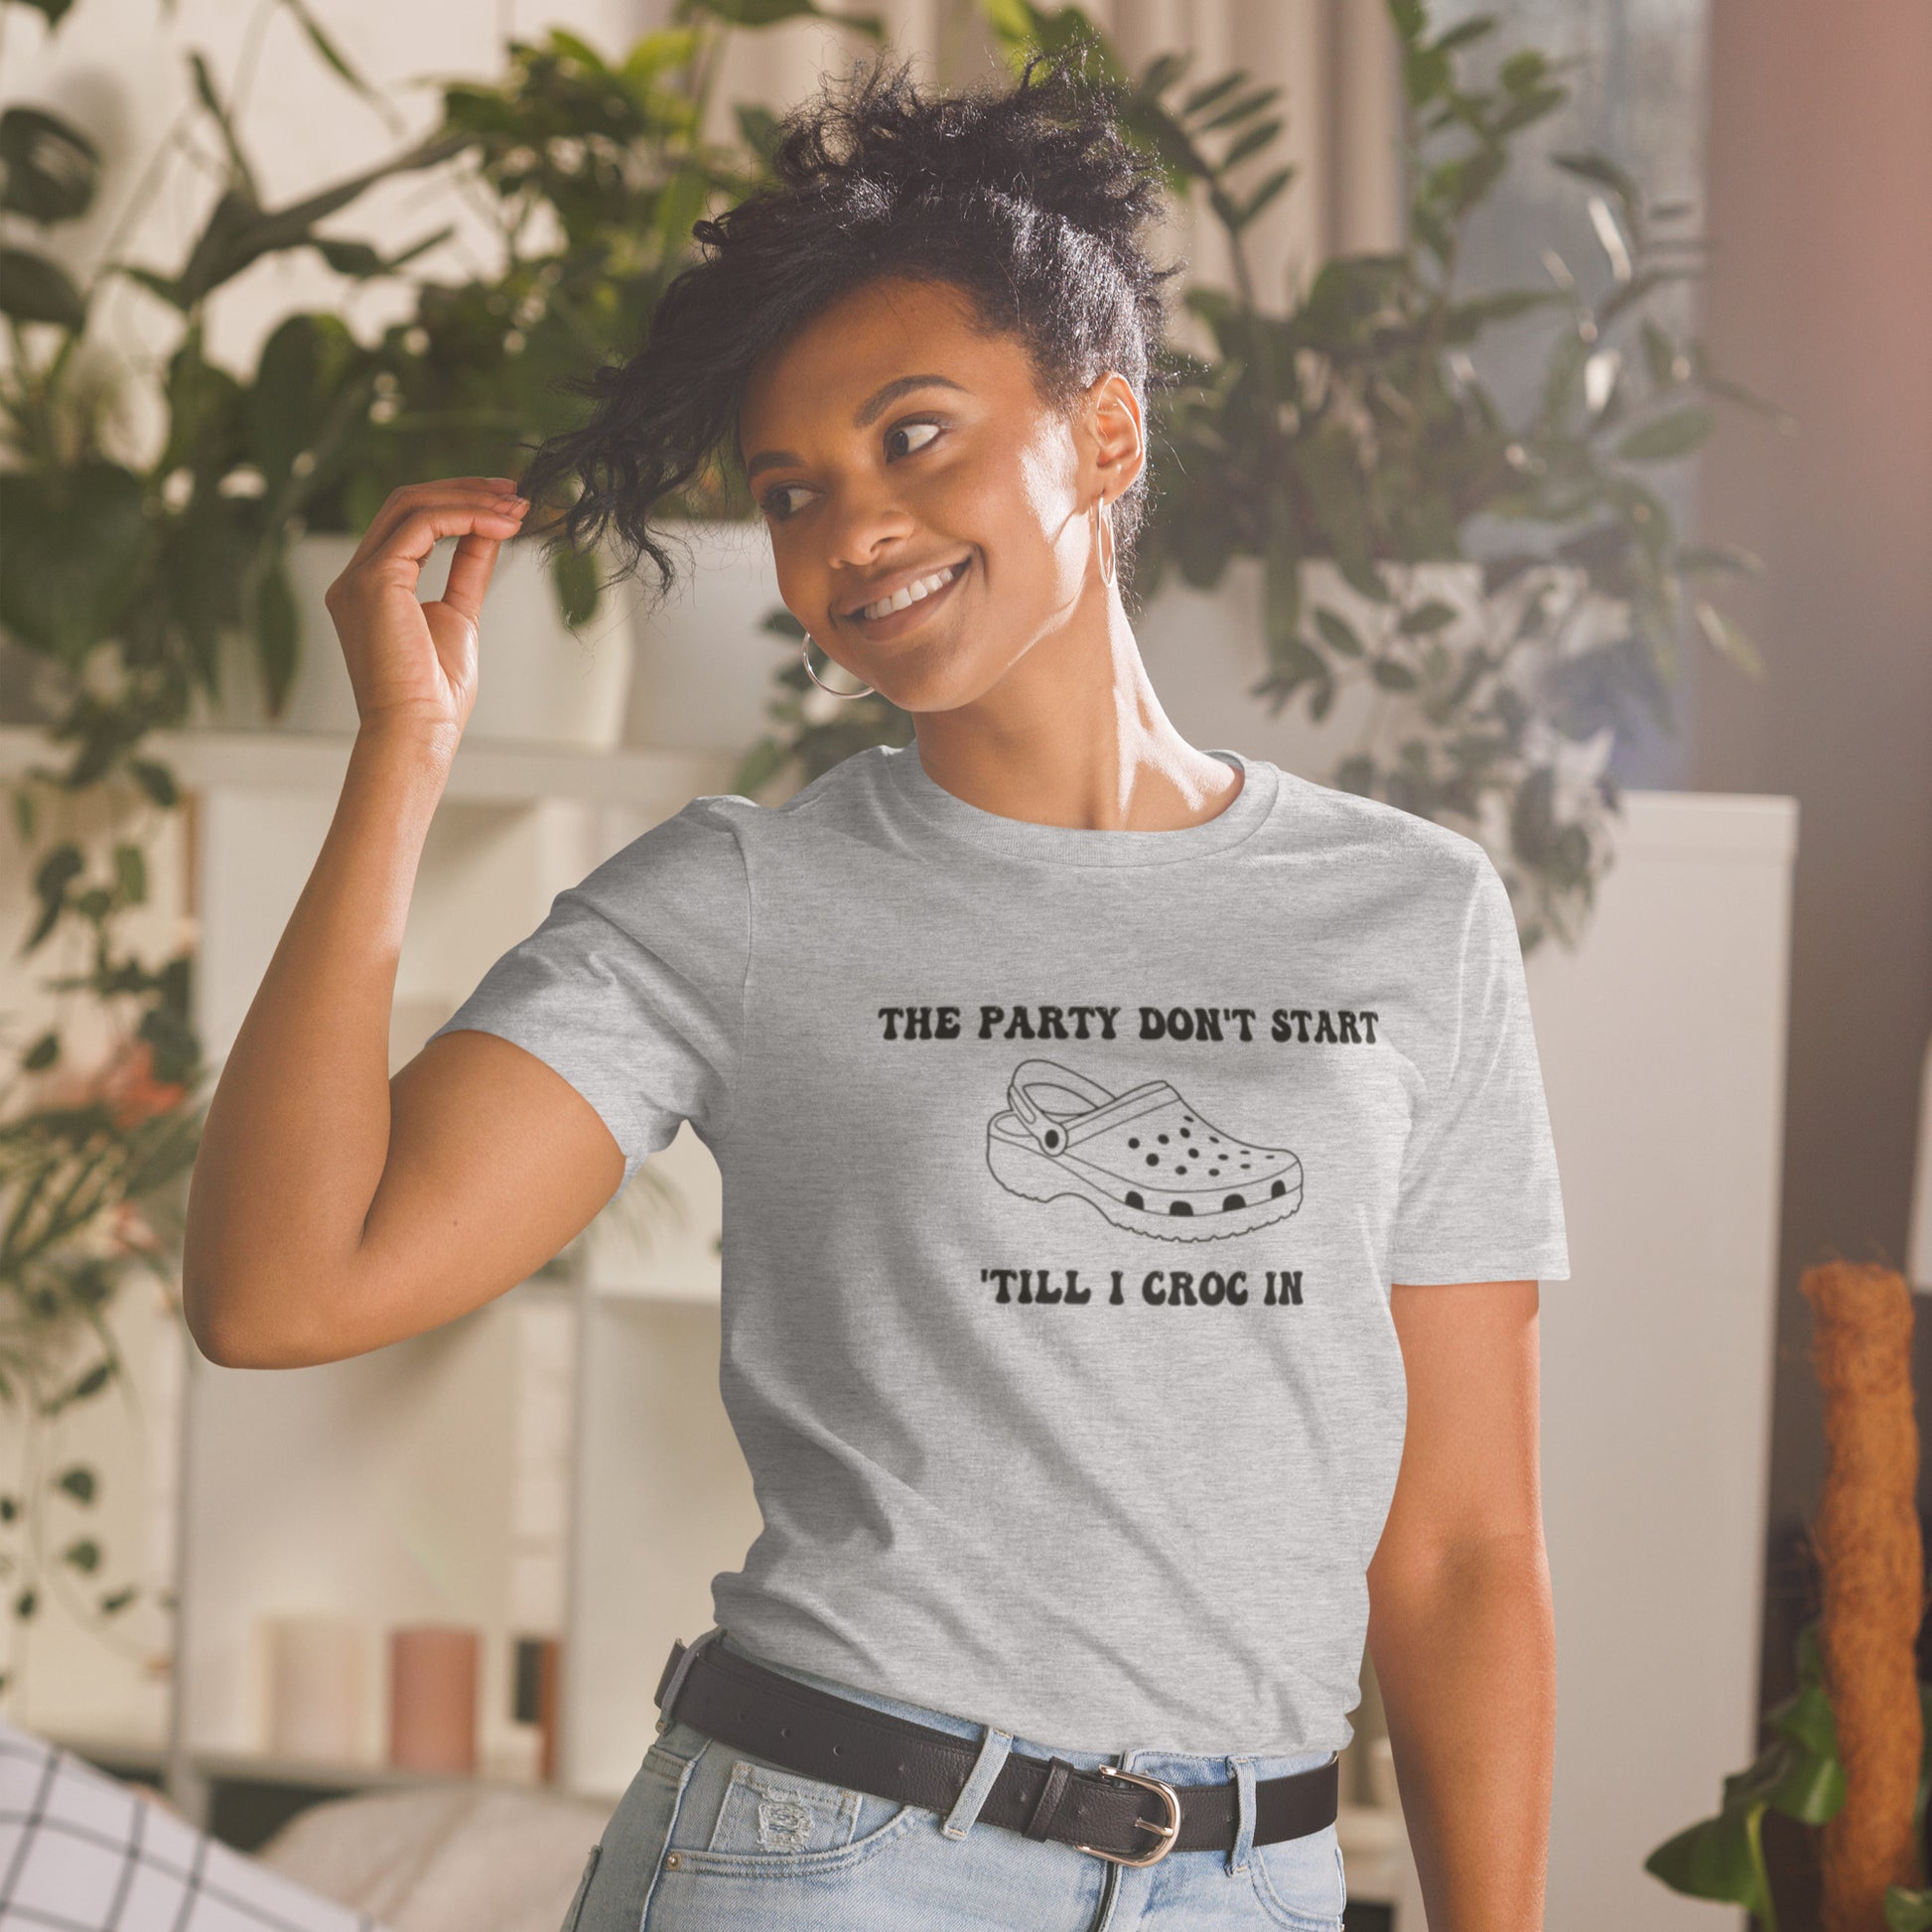 The Party Don’t Start ’Till I Croc In Short-Sleeve Unisex